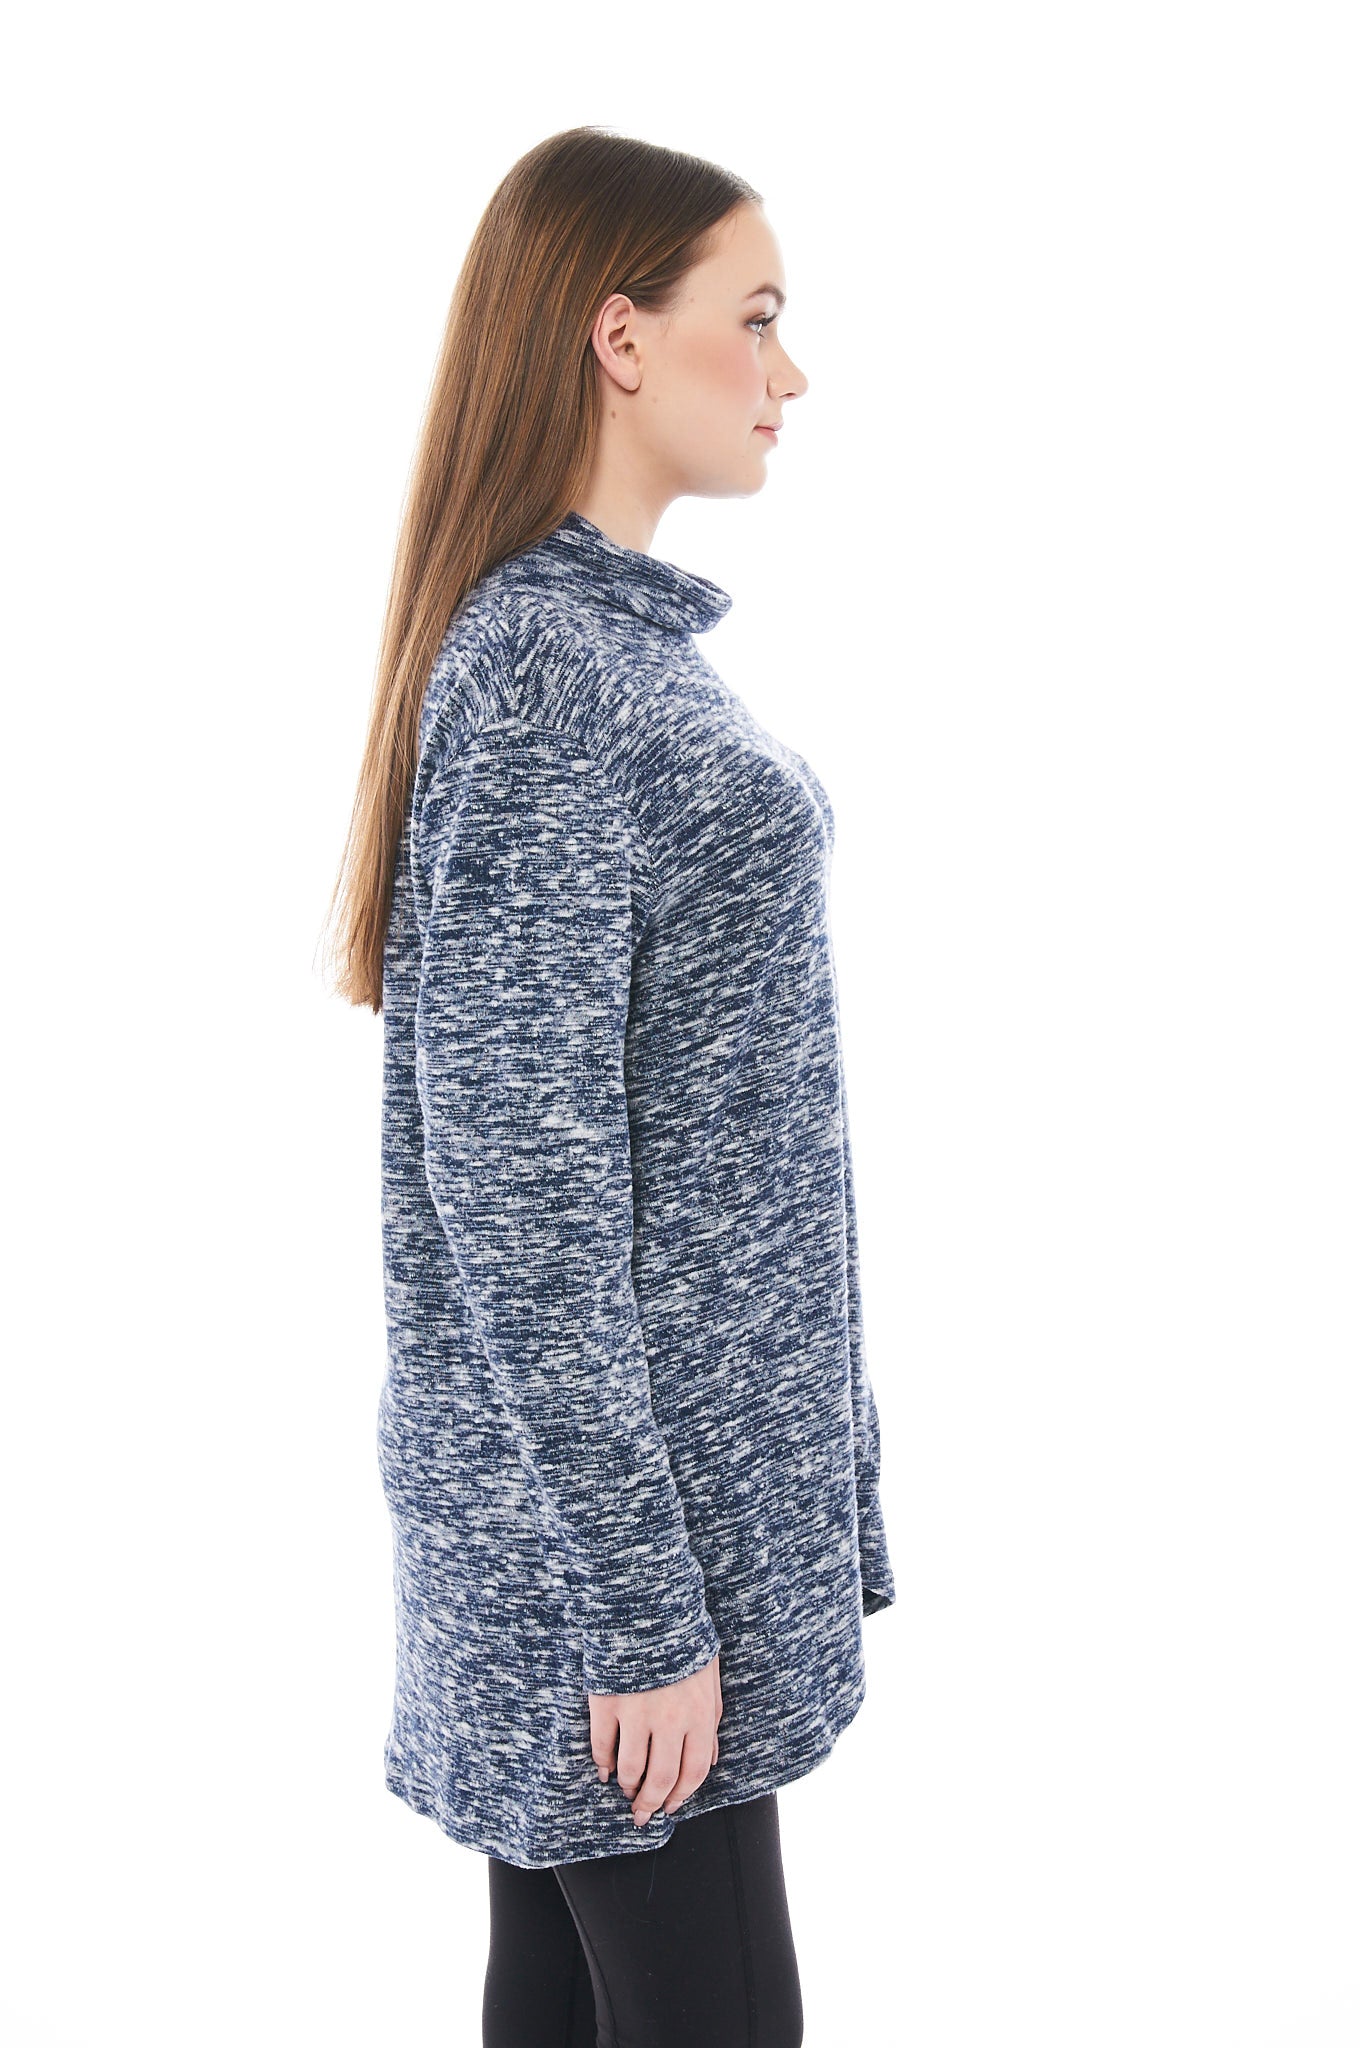 THE KEEP IT SHORT TUNIC IN BILLIE BLUE